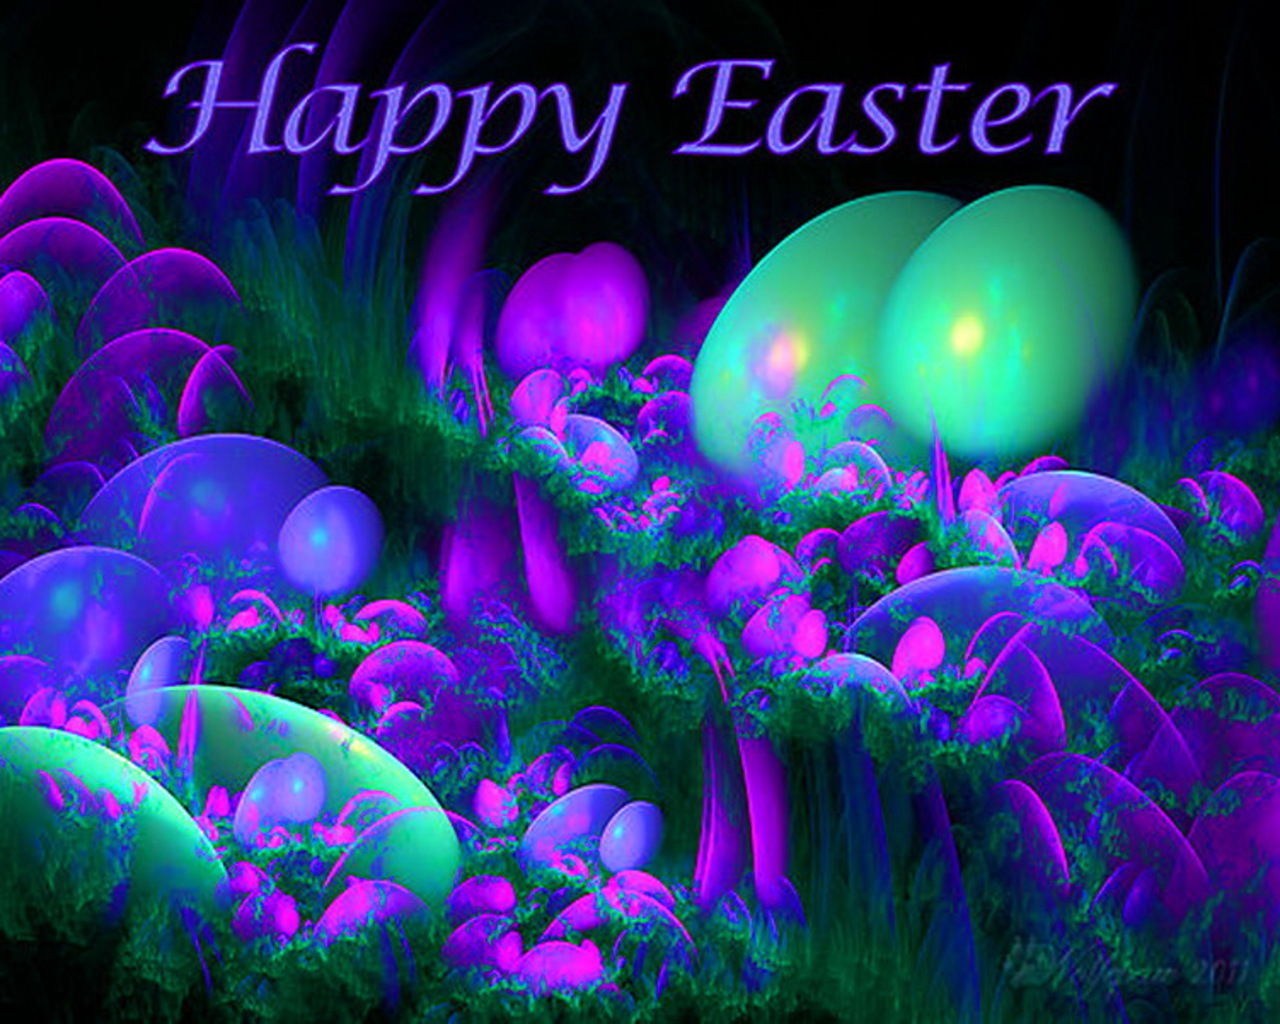 Easter Images - Happy Easter Images 2019 , HD Wallpaper & Backgrounds